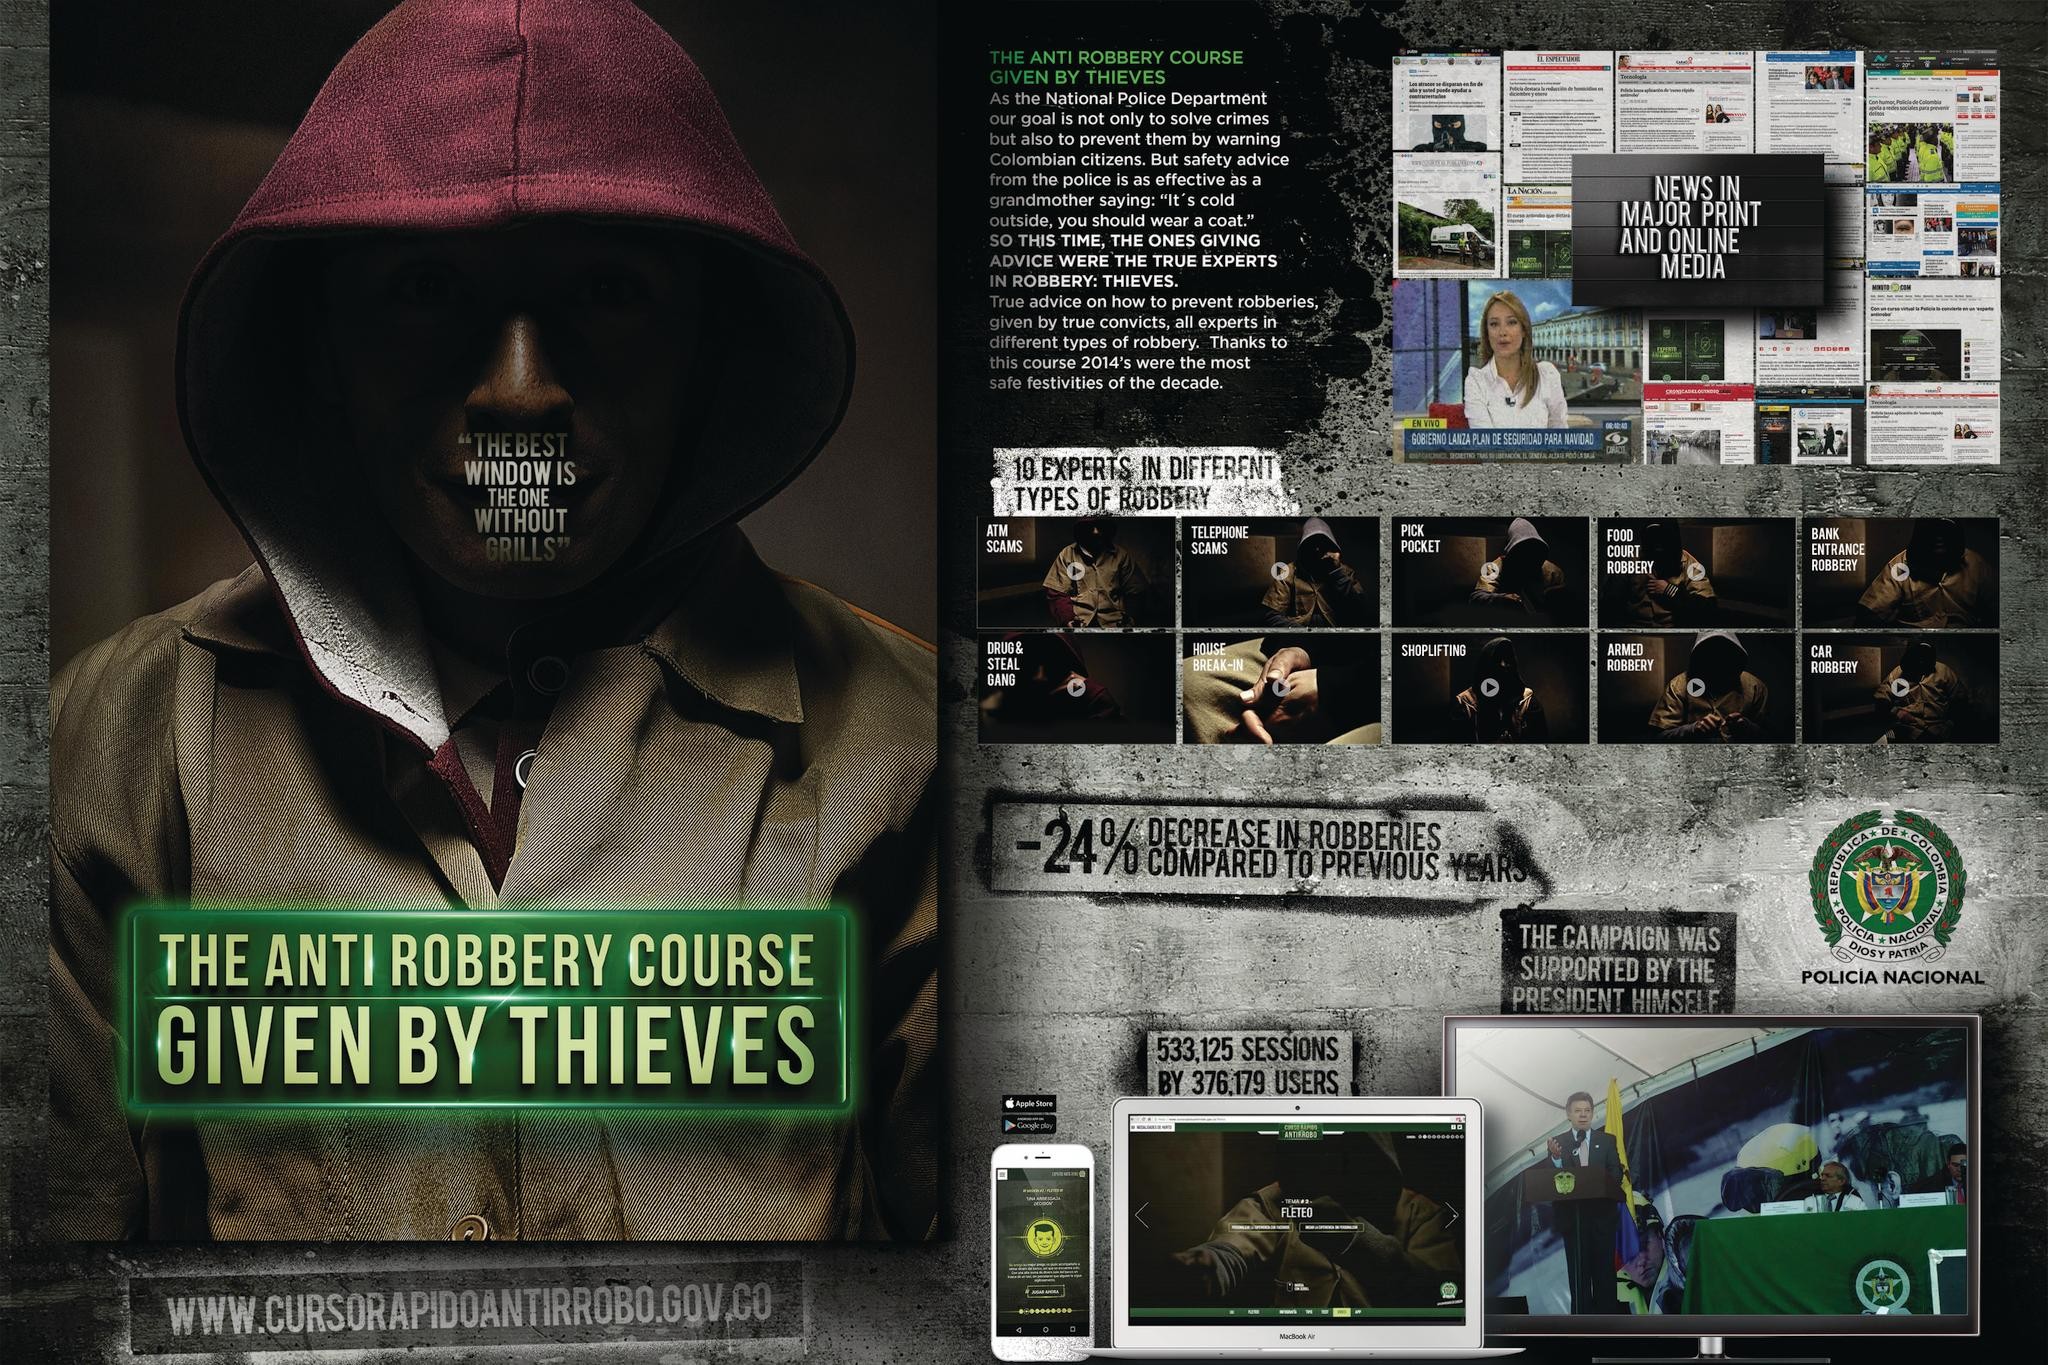 THE ANTI ROBBERY COURSE GIVEN BY THIEVES